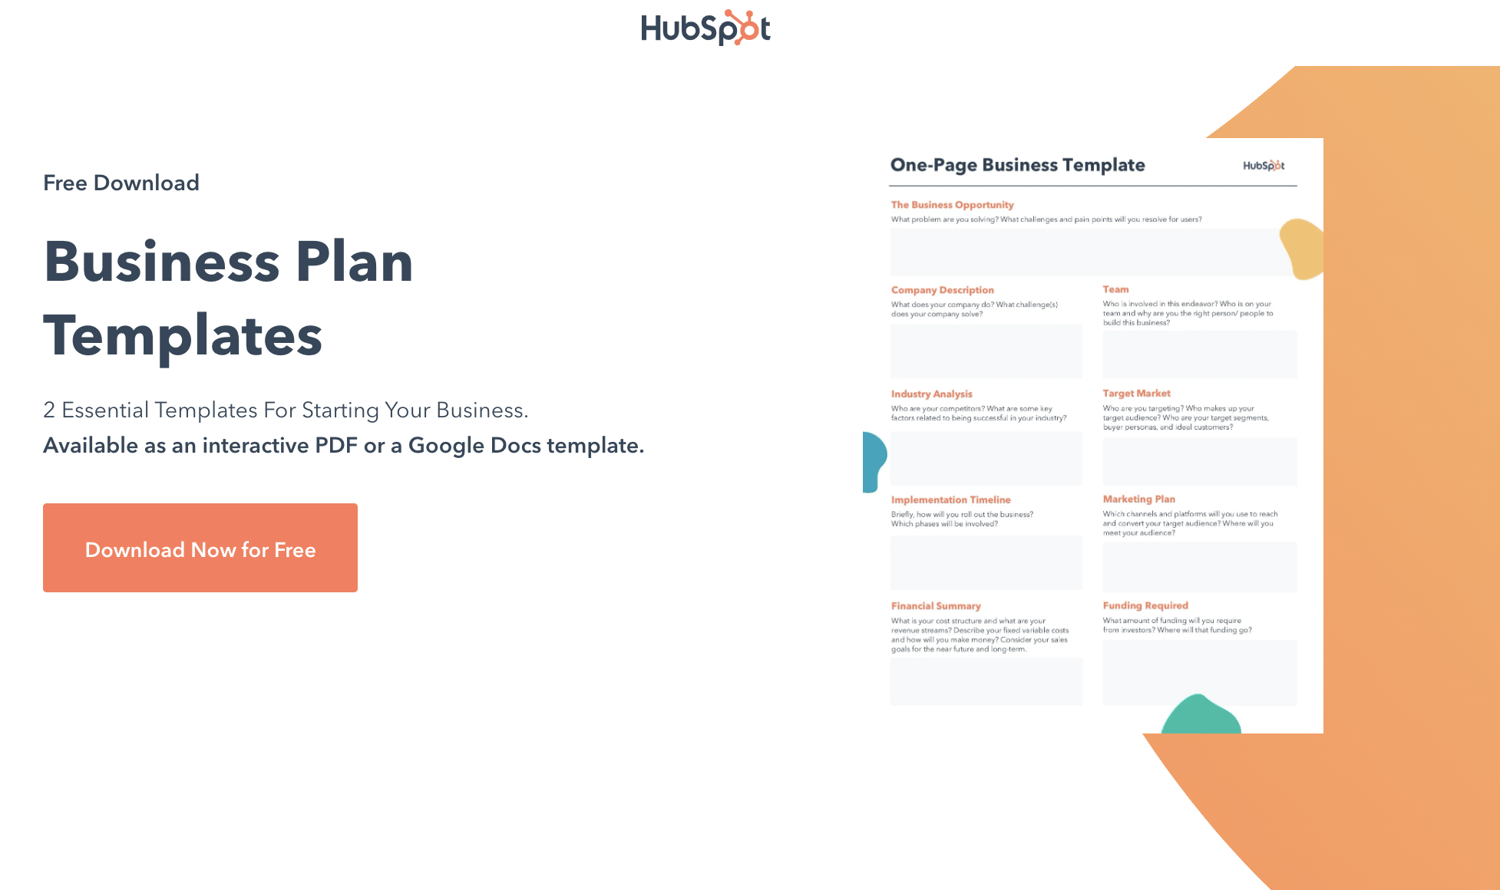 28 Sample Business Plans to Help You Write Your Own